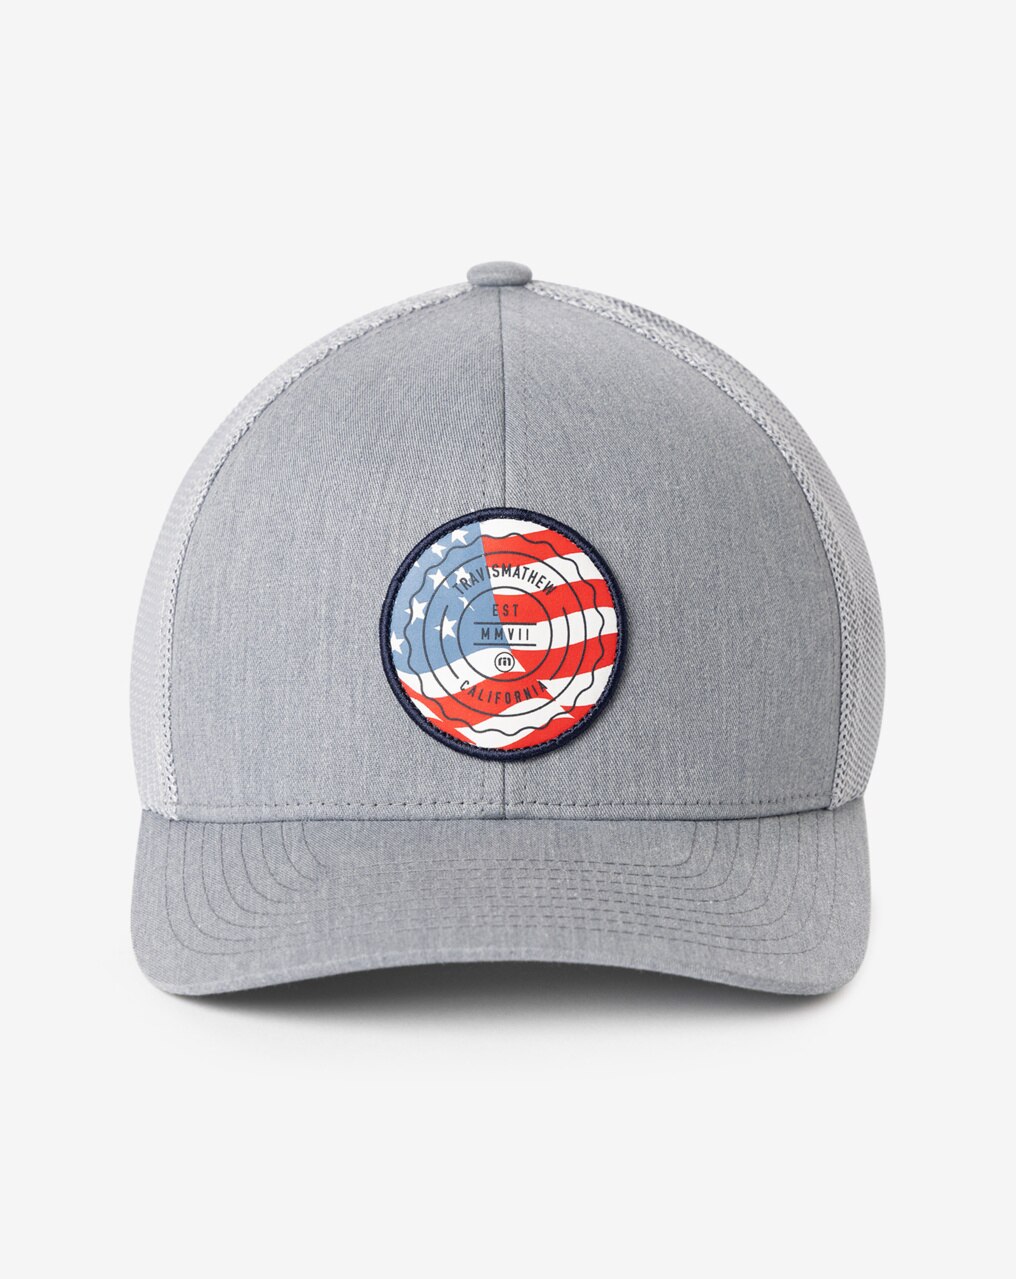 THE PATCH FLAG SNAPBACK HAT 1